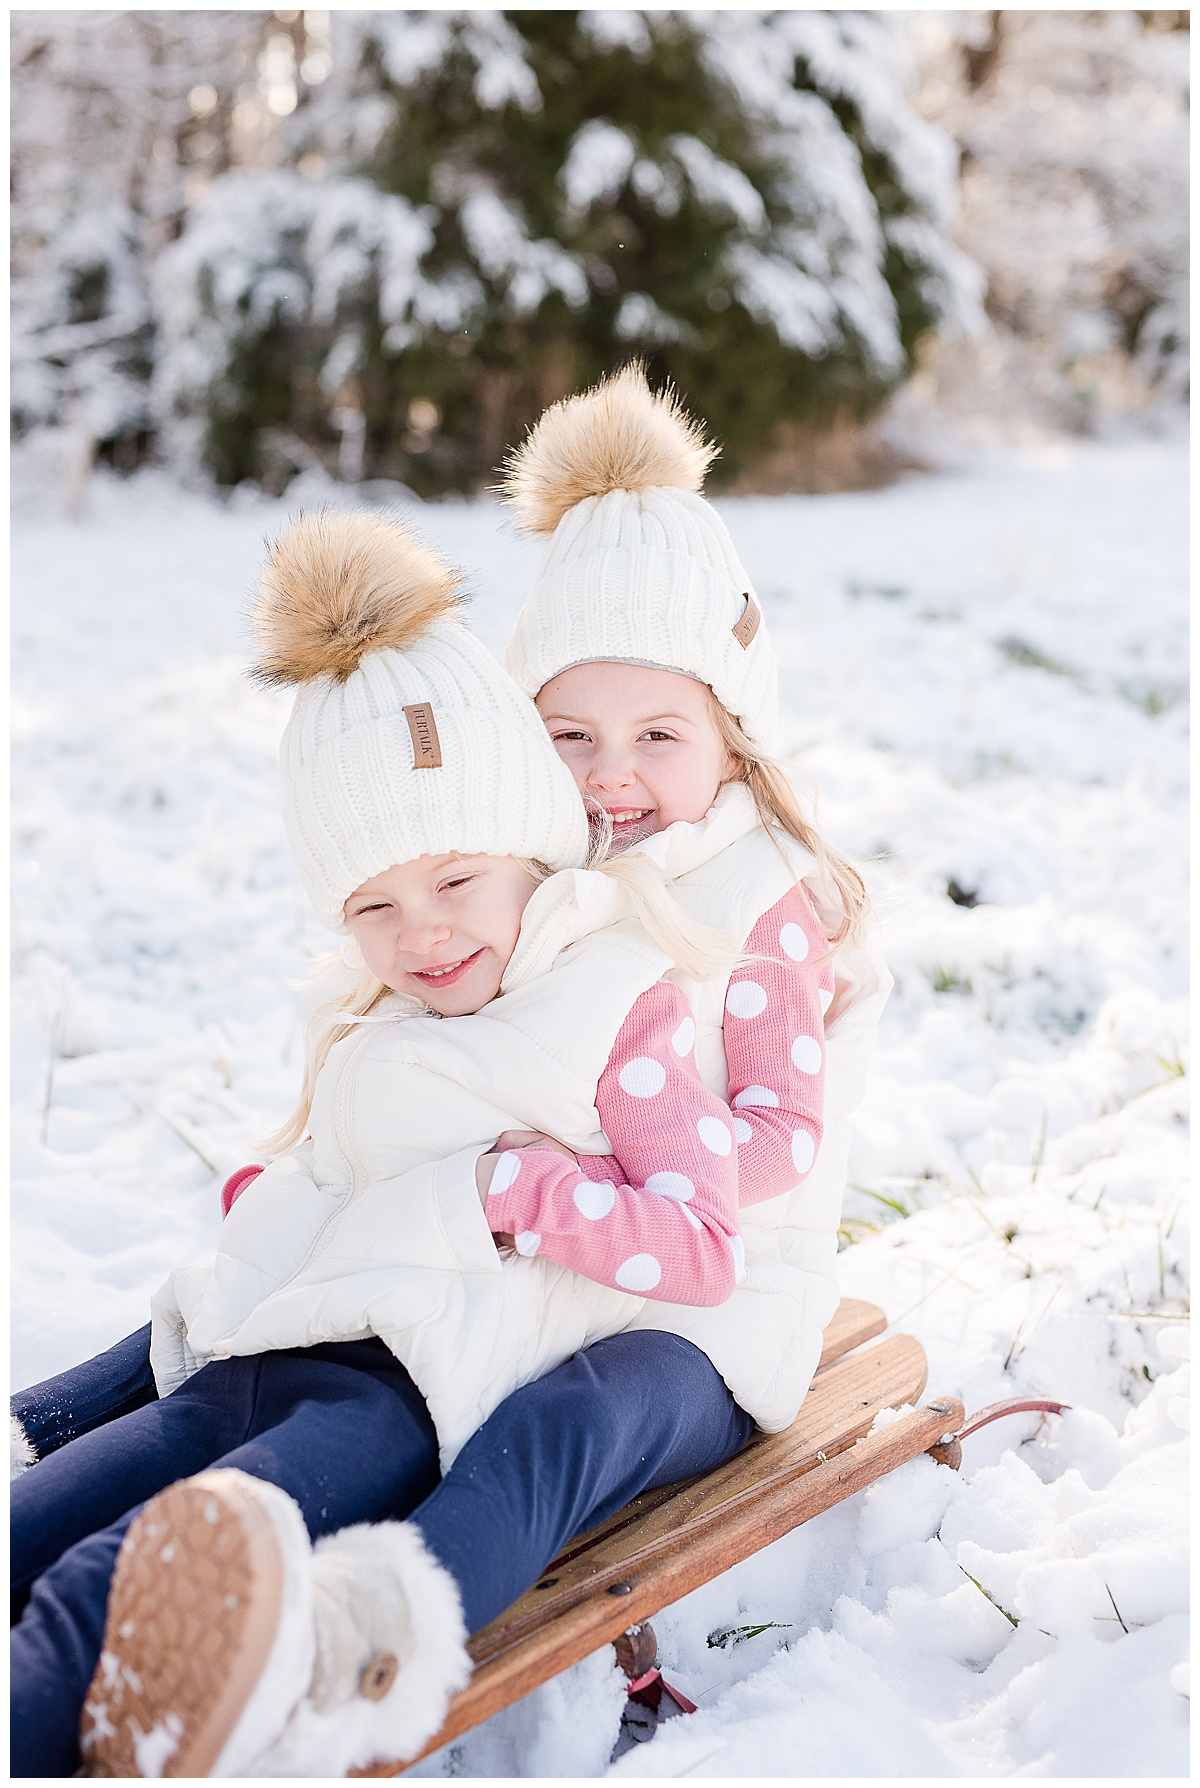 Winter Family Photos, Snow Family Photos, Family Photography, Winter Family Photoshoot, Caiti Garter Photography, Prince George Virginia Photographer, Old Navy Family Photo Outfits, Childrens Tulle Dresses, Snow Pictures, Family Snow Pictures